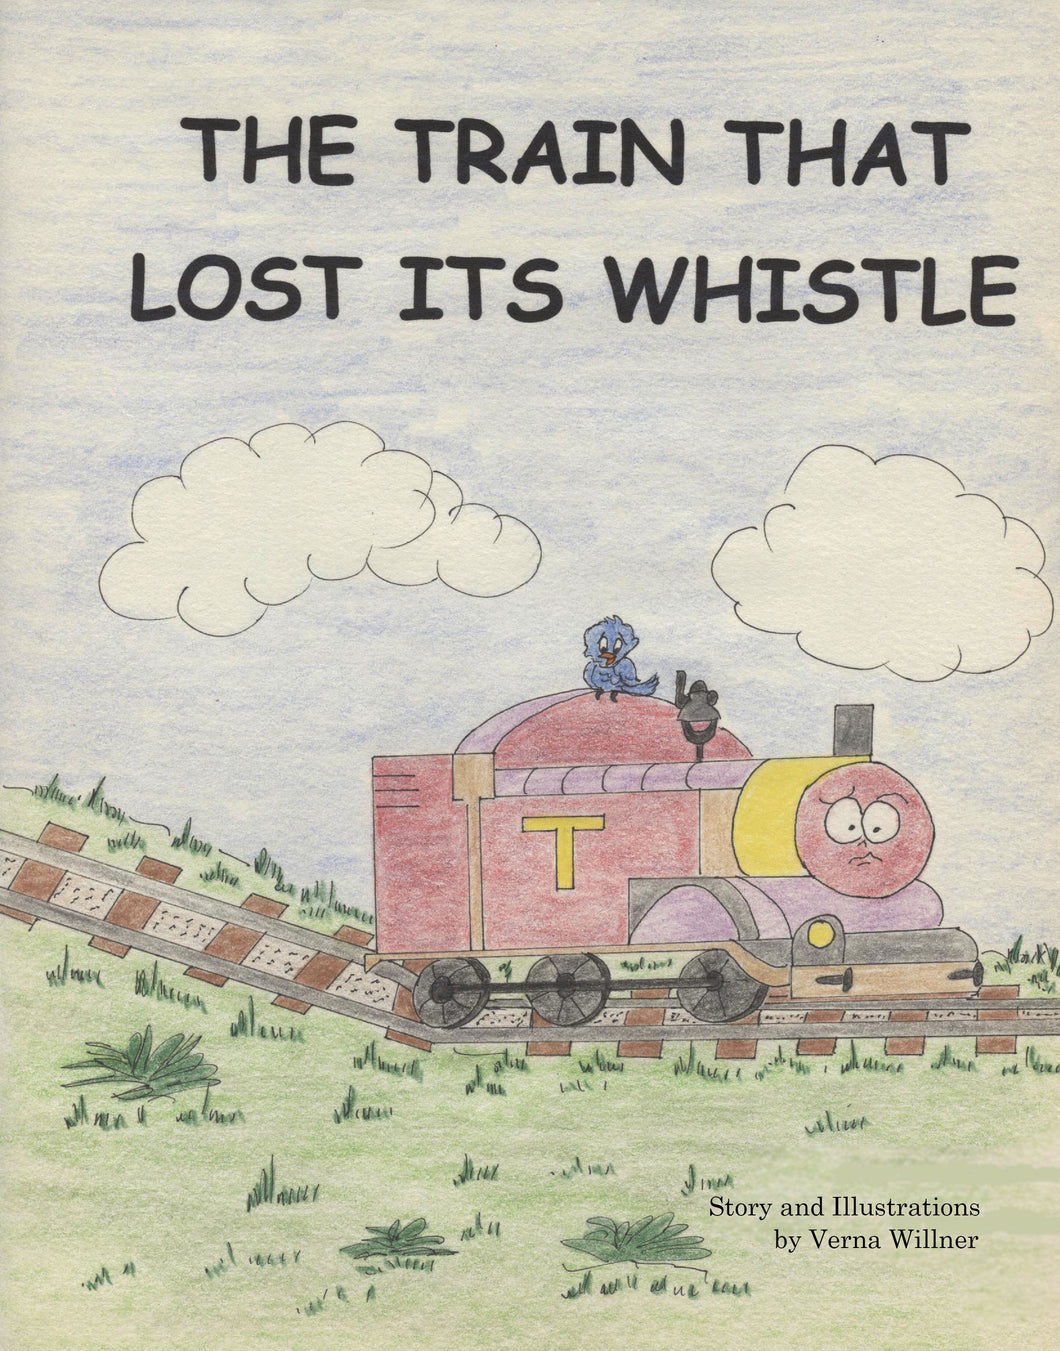 THE TRAIN THAT LOST ITS WHISTLE